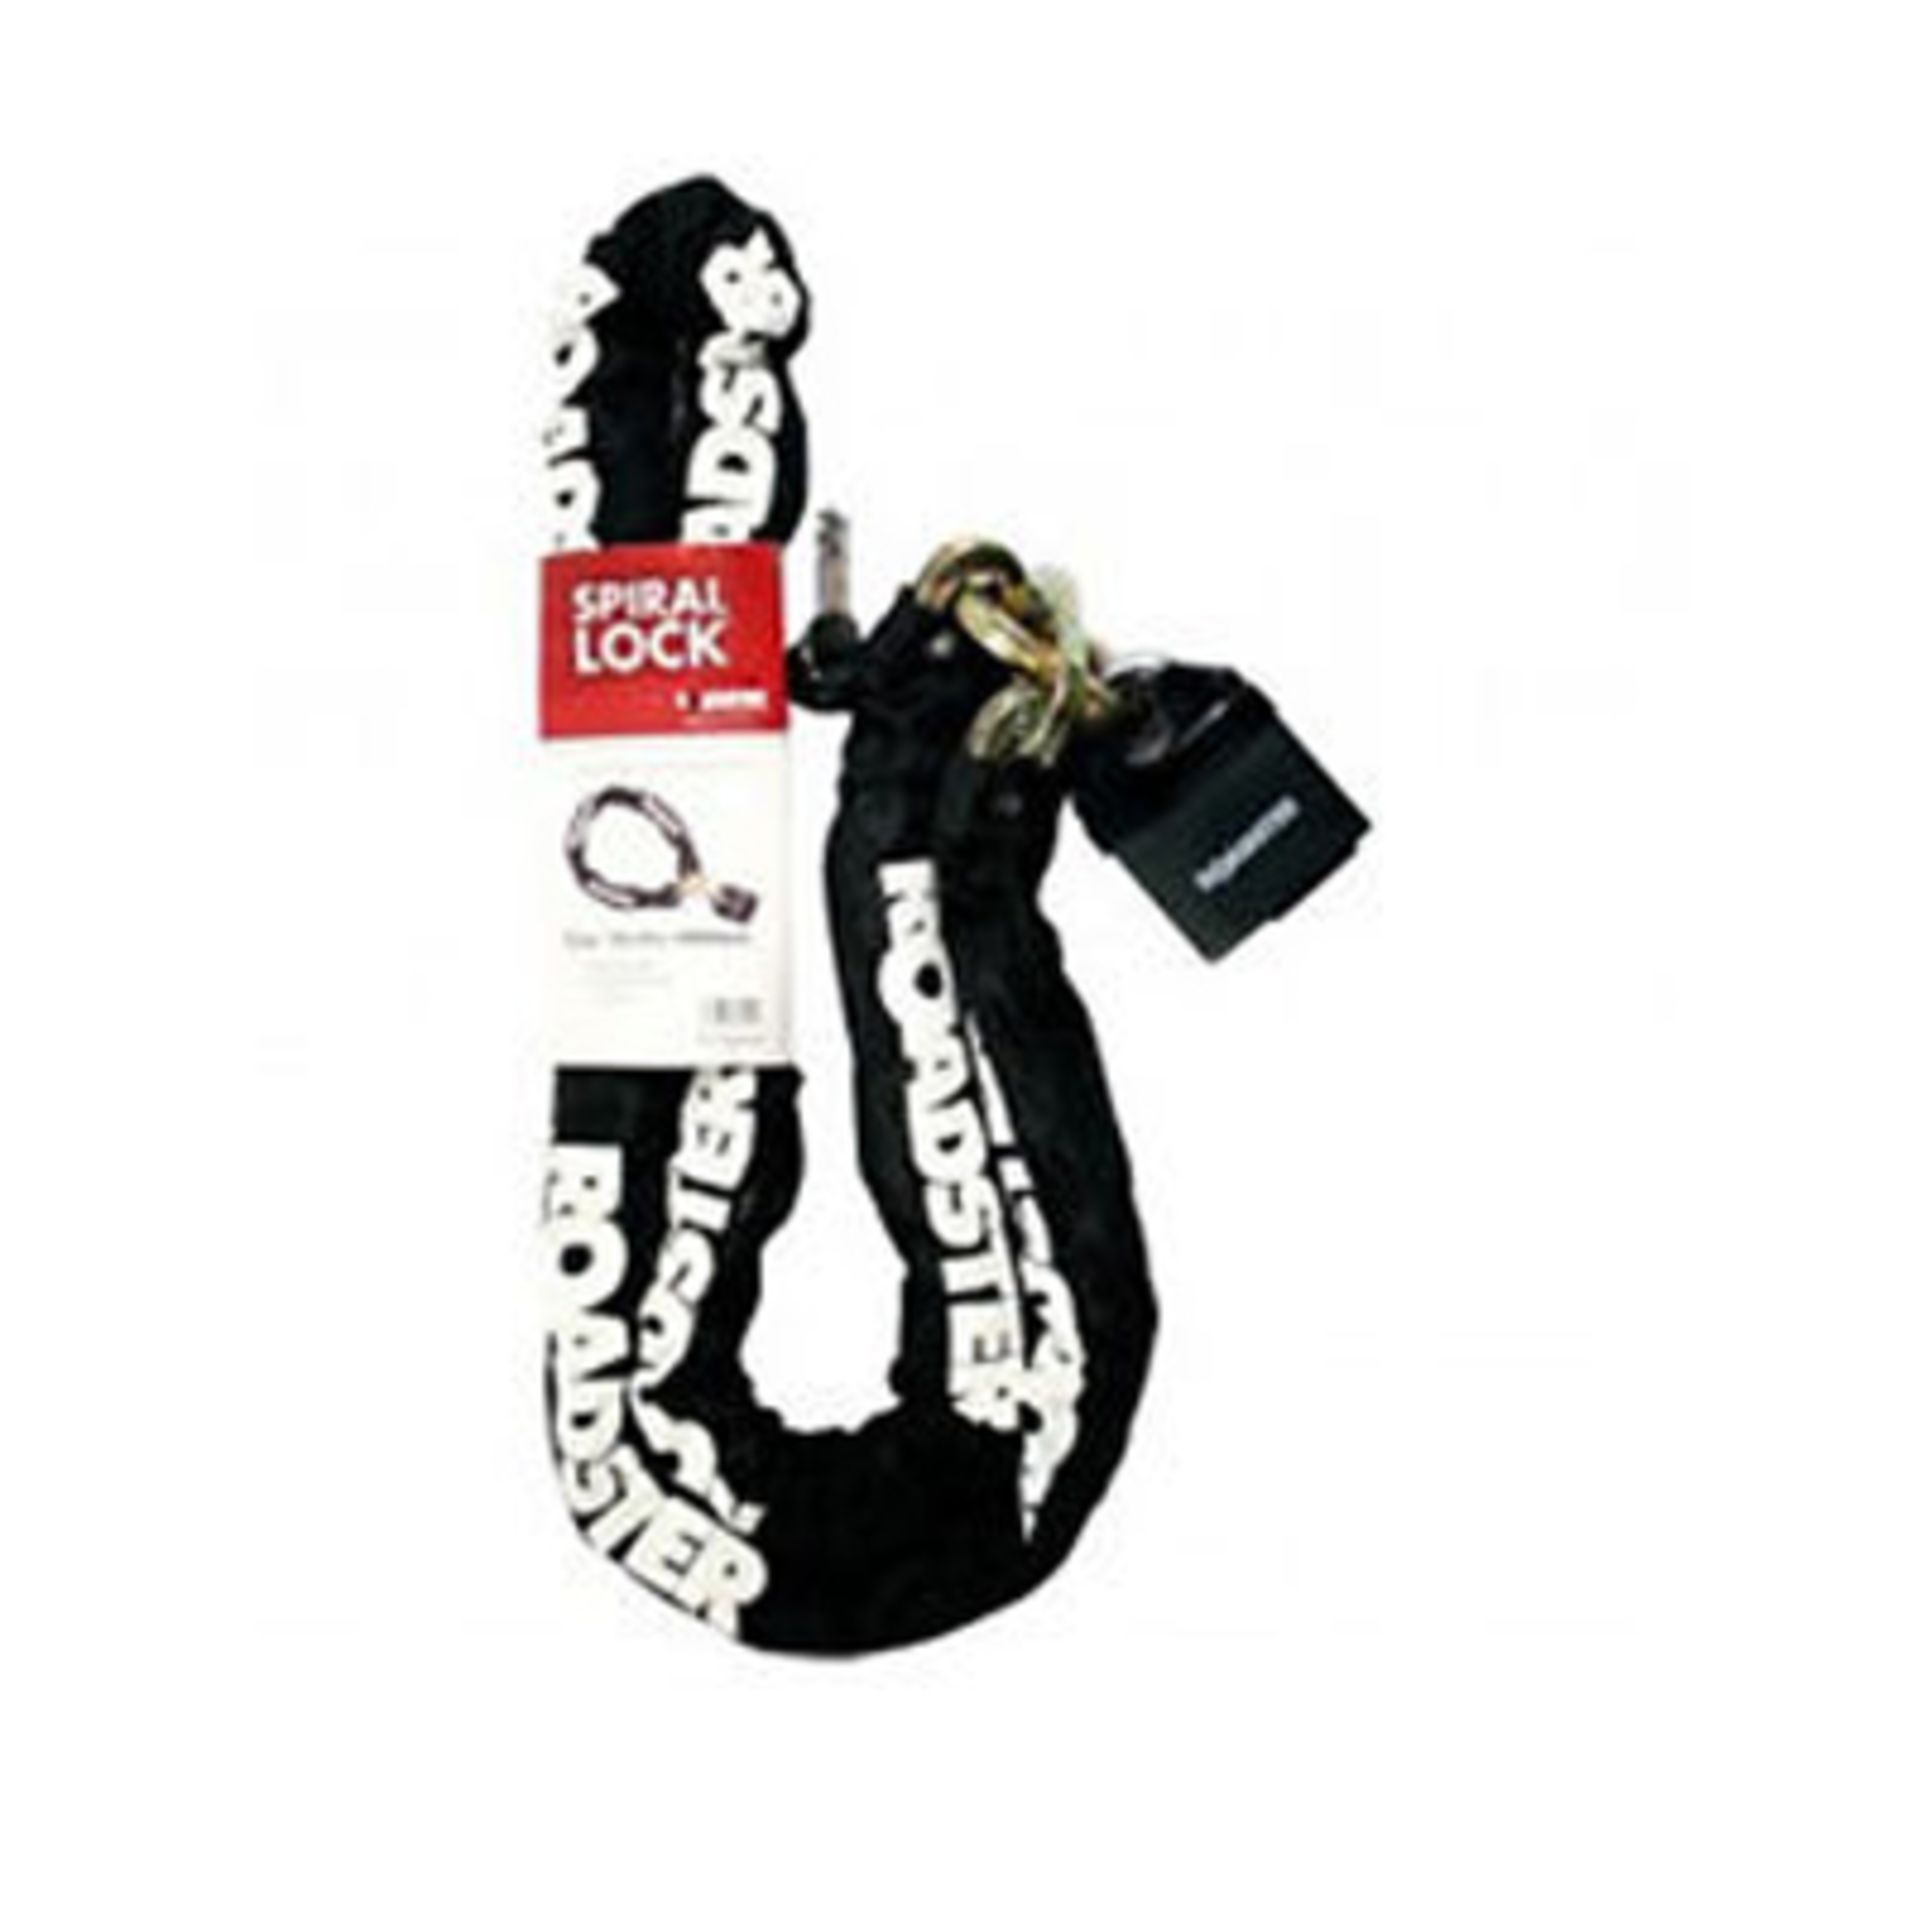 V Spiral Lock Heavy Duty Security Chain With Alarm 10mm x 10mm x 1800mm